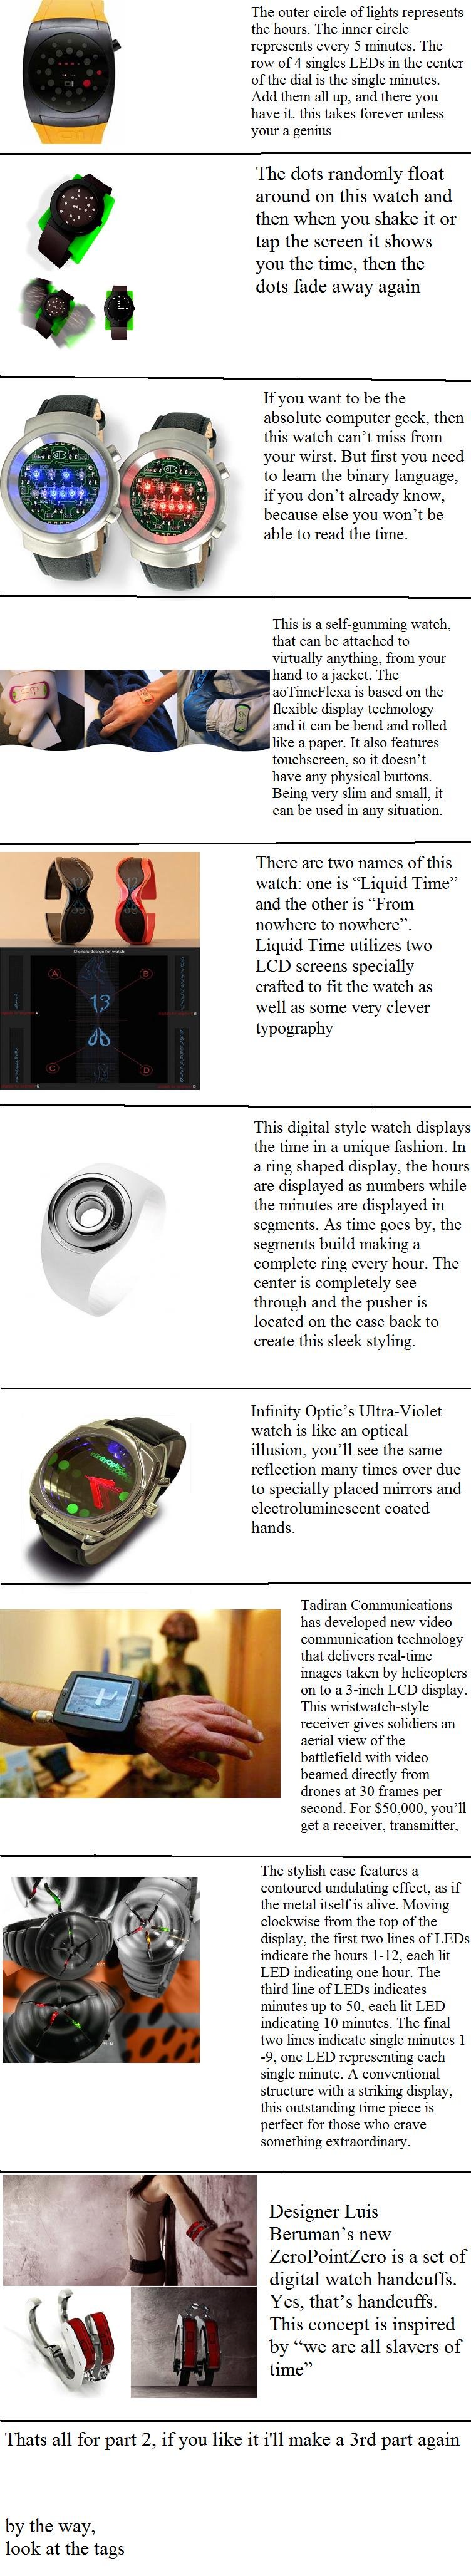 Weird Watches 2. EDIT: here is part one if you guys like it &lt;a href=&quot;pictures/337771/Weird+Watches/&quot; target=blank&gt;funnyjunk.com/funnypictures/33